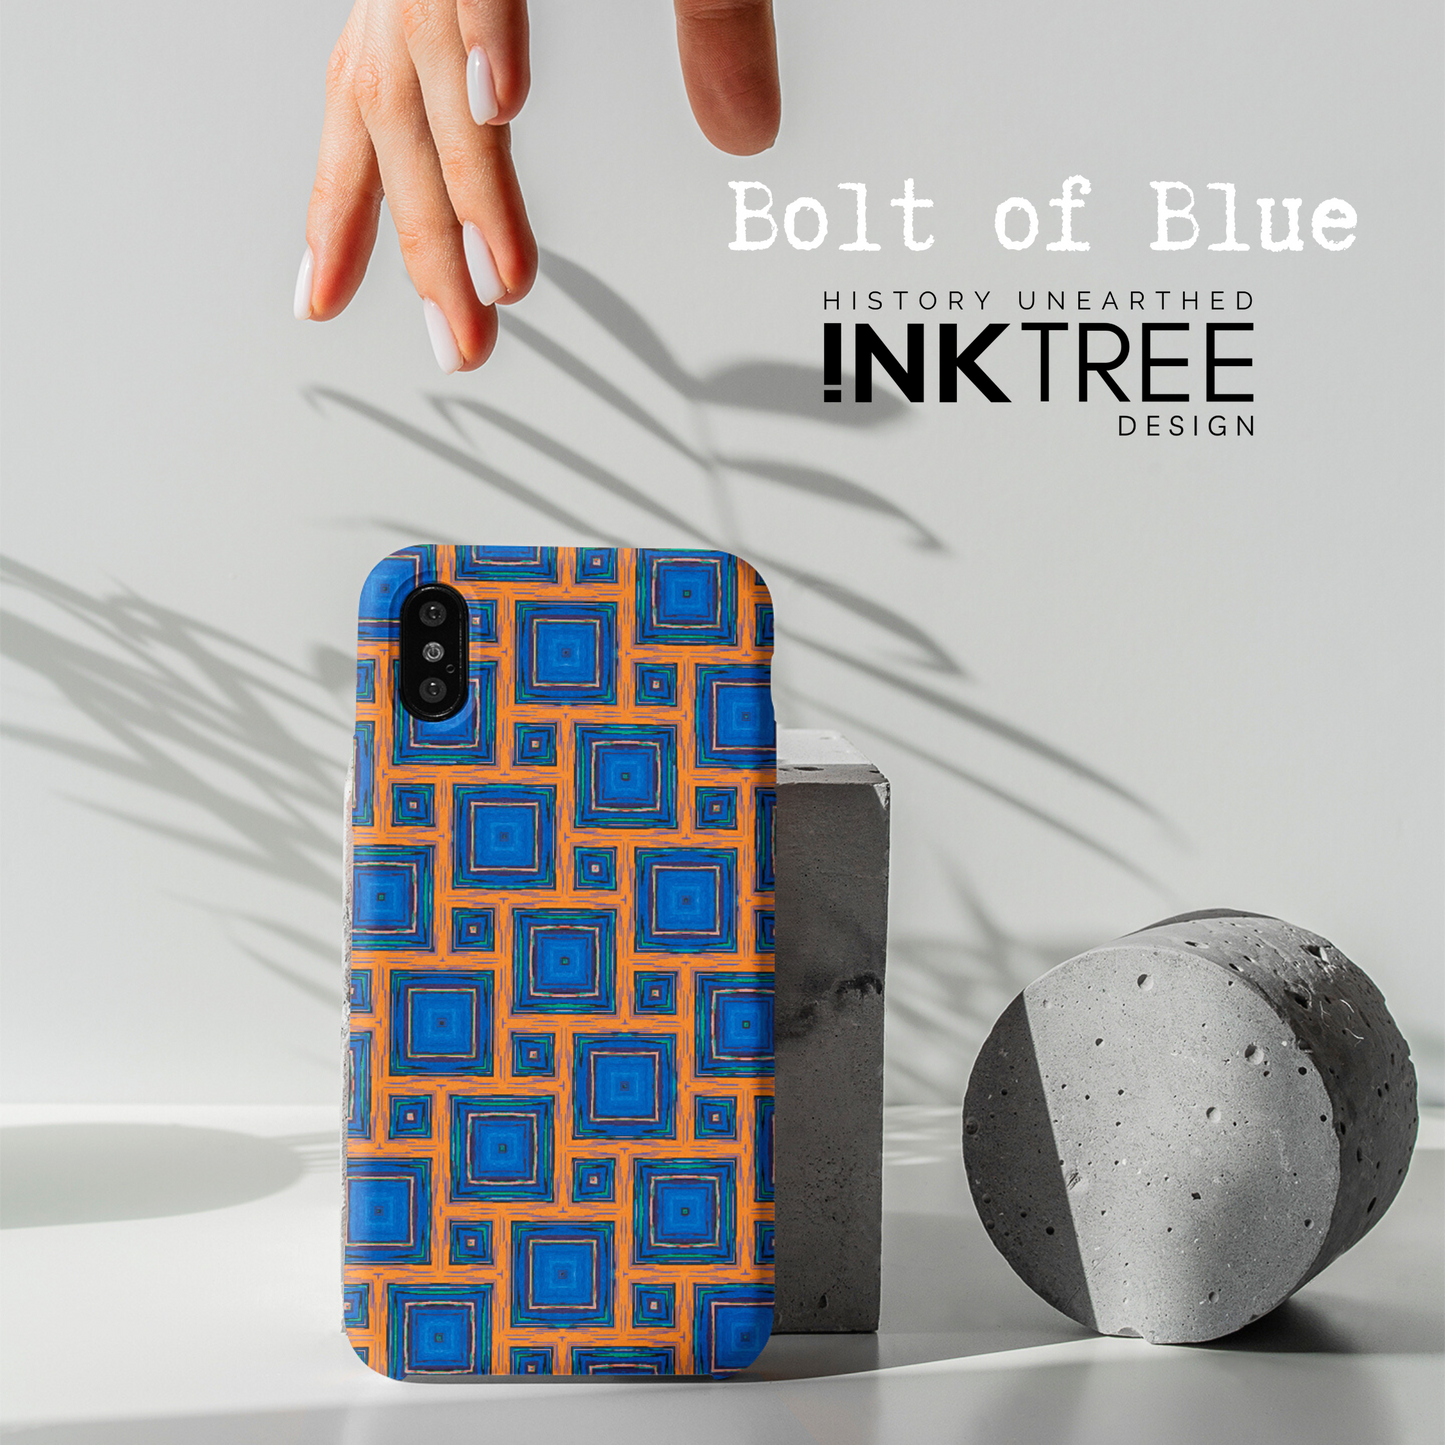 A female hand with white nail polish reaches down to a mobile phone with an orange, white, black, blue and green square pattern the phone cover.  There is a shadow of a plant on a white wall background.  There is a grey concrete disk sitting on the table surface.